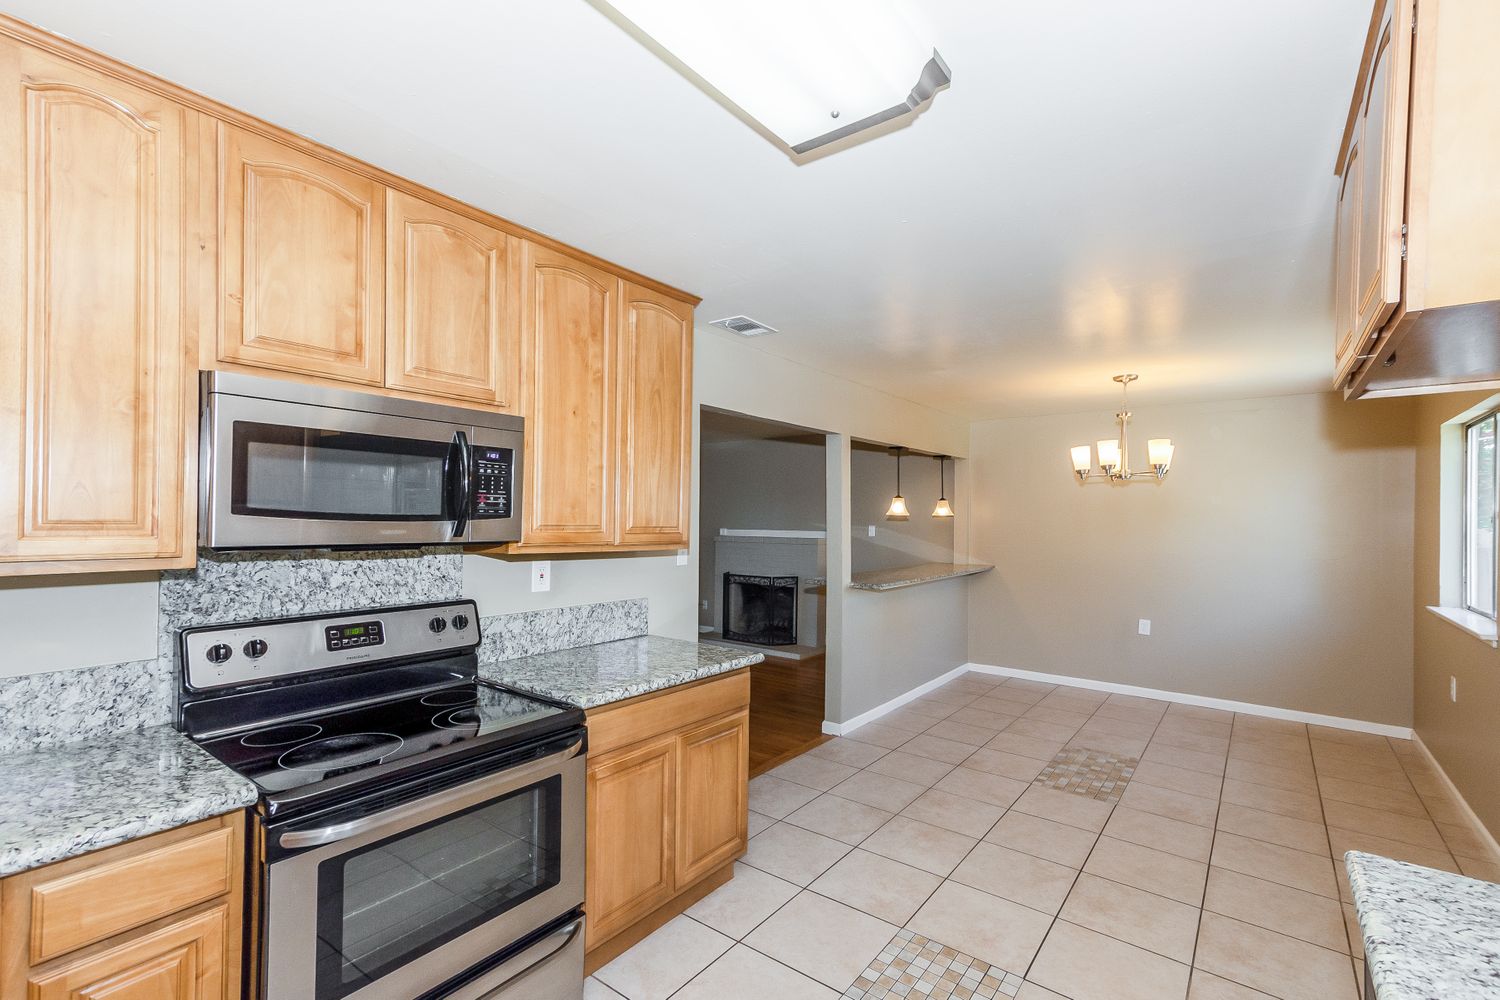 Kitchen with granite countertops, stainless-steel appliances and tile flooring at Invitation Homes Northern CA.